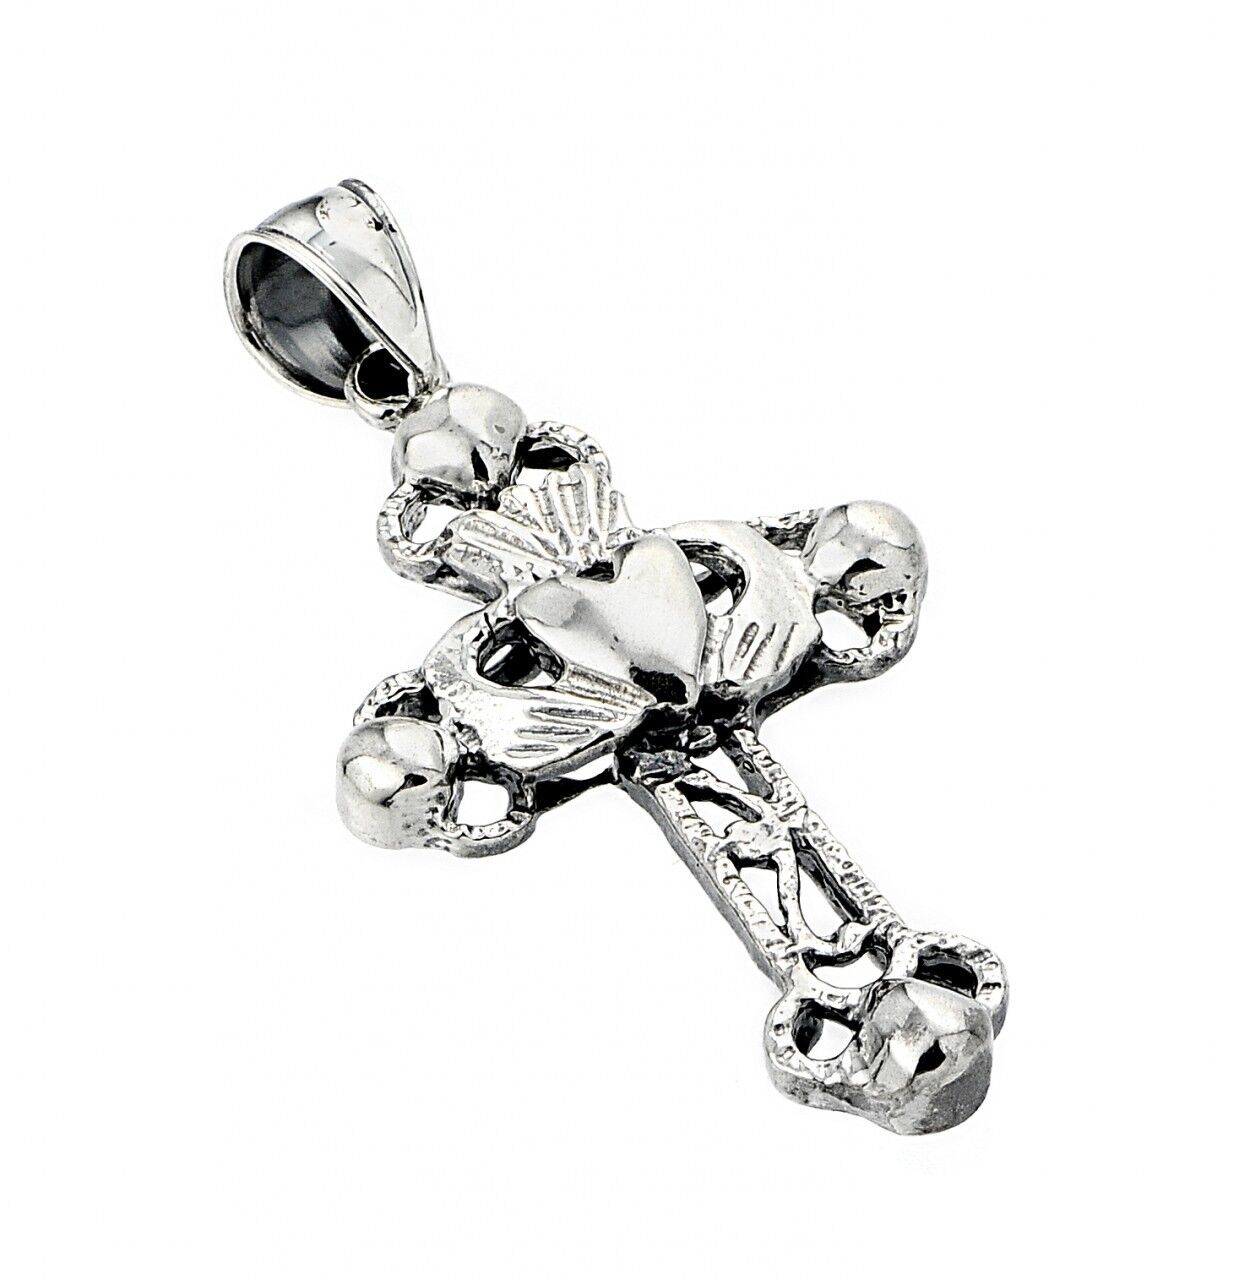 Oxidized 925 Sterling Silver Charming Claddagh Cross Pendant